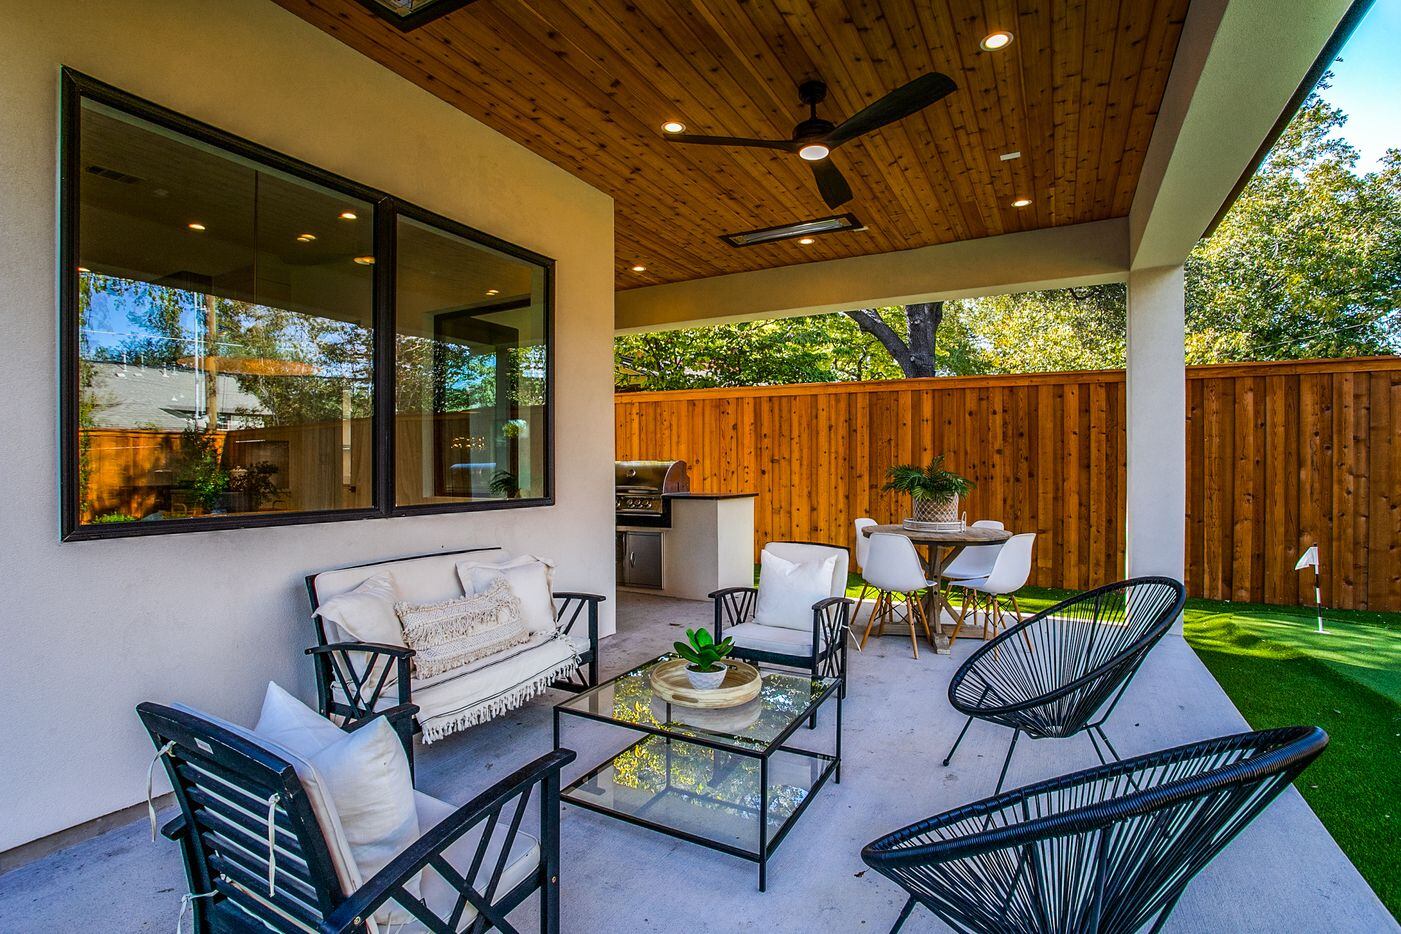 The second patio boasts a seating area and a built-in grill and heaters.